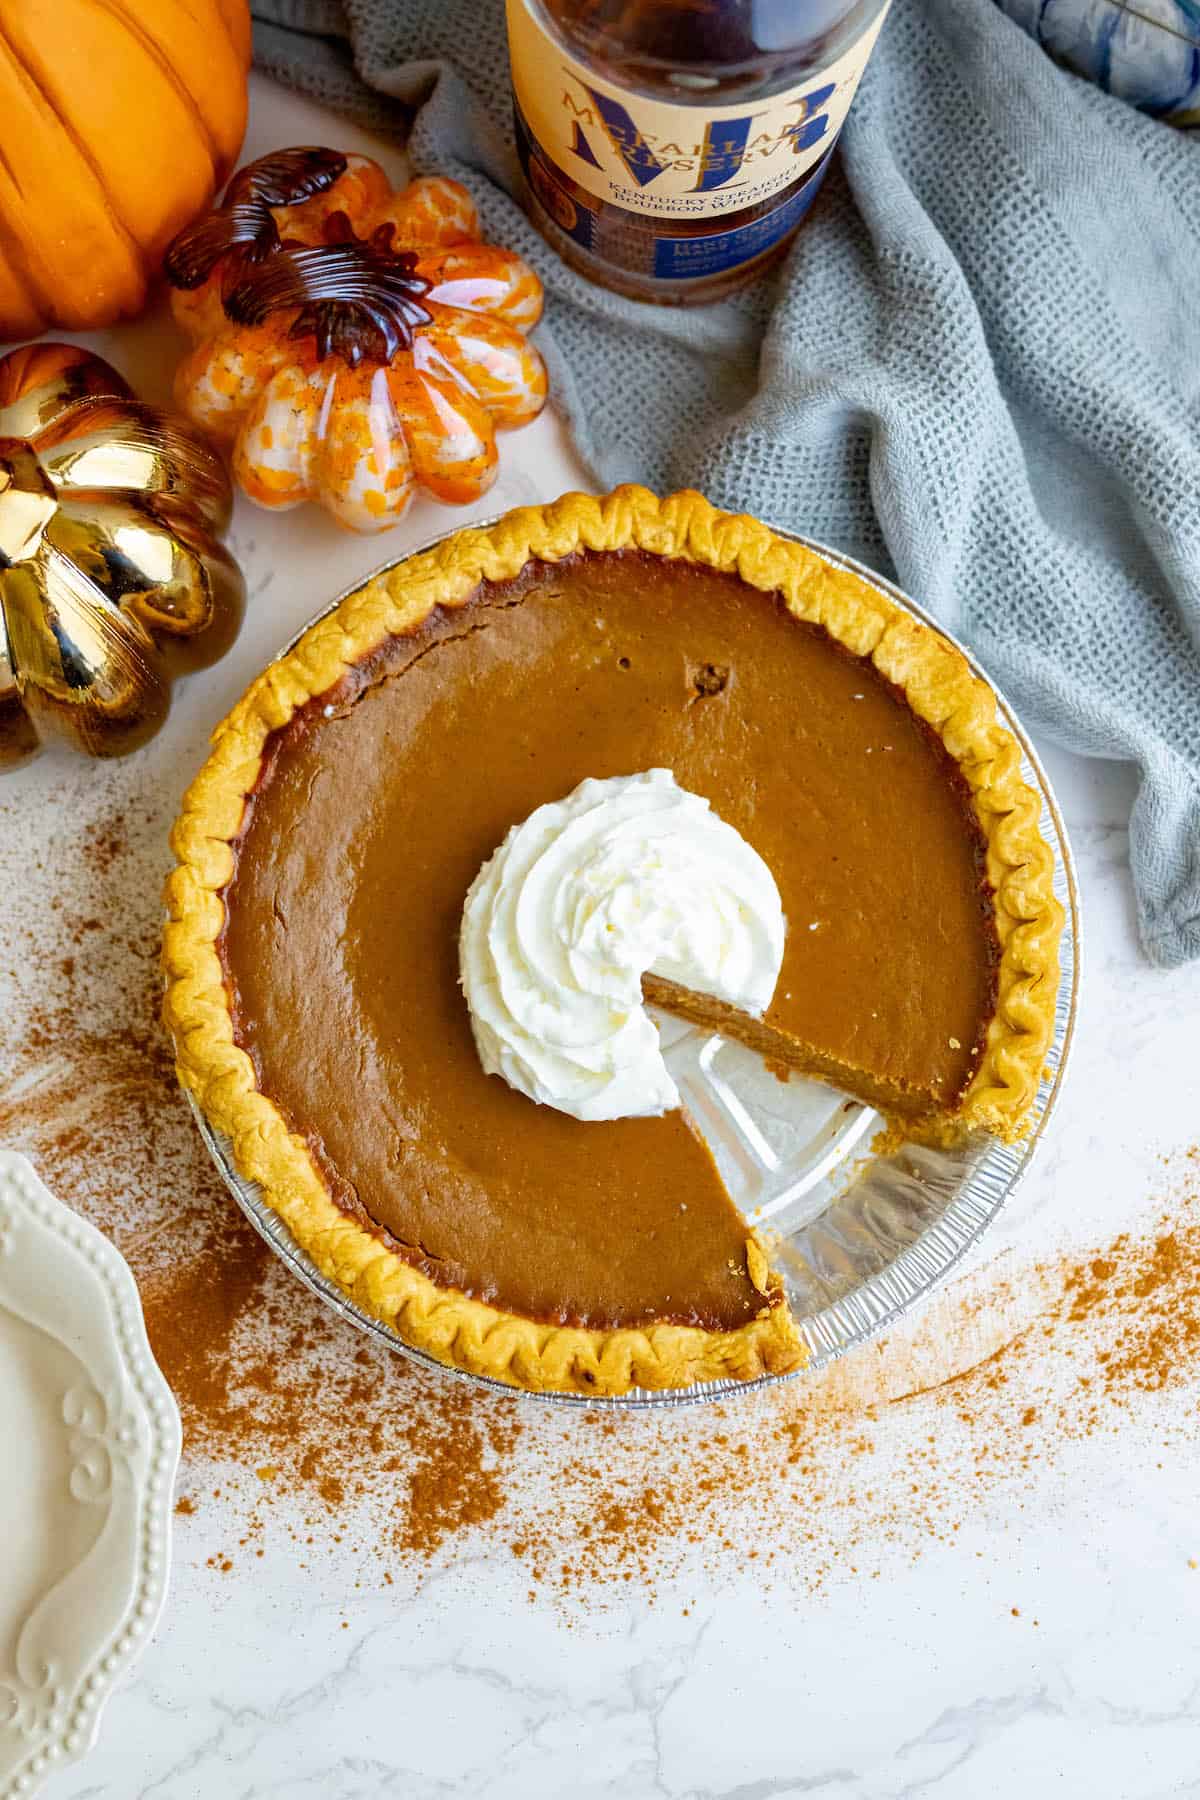 A slice of spicy pumpkin pie with whipped cream on top.